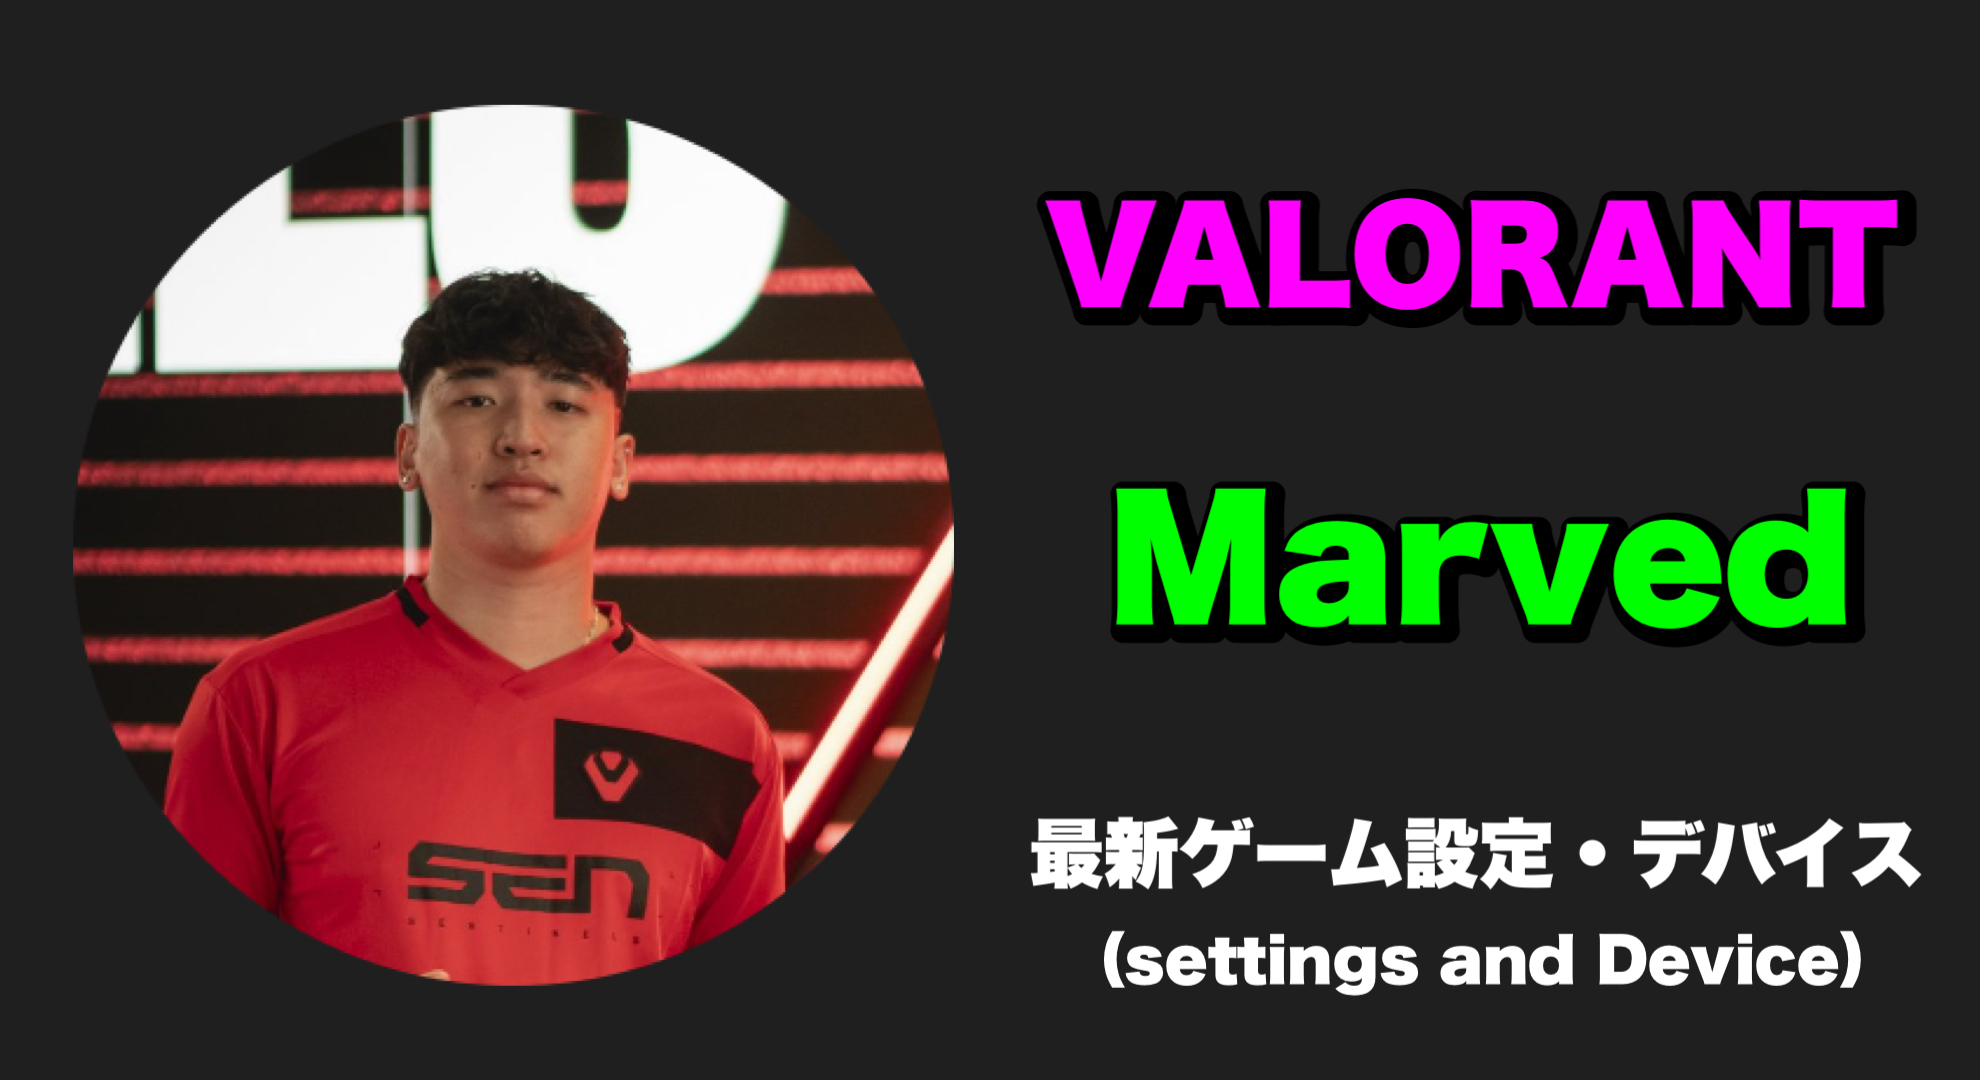 【VALORANT】Marved(マーブド) 感度、キー配置、クロスヘア、設定、デバイス Marved sens Marved settings Marved crosshair Marved device